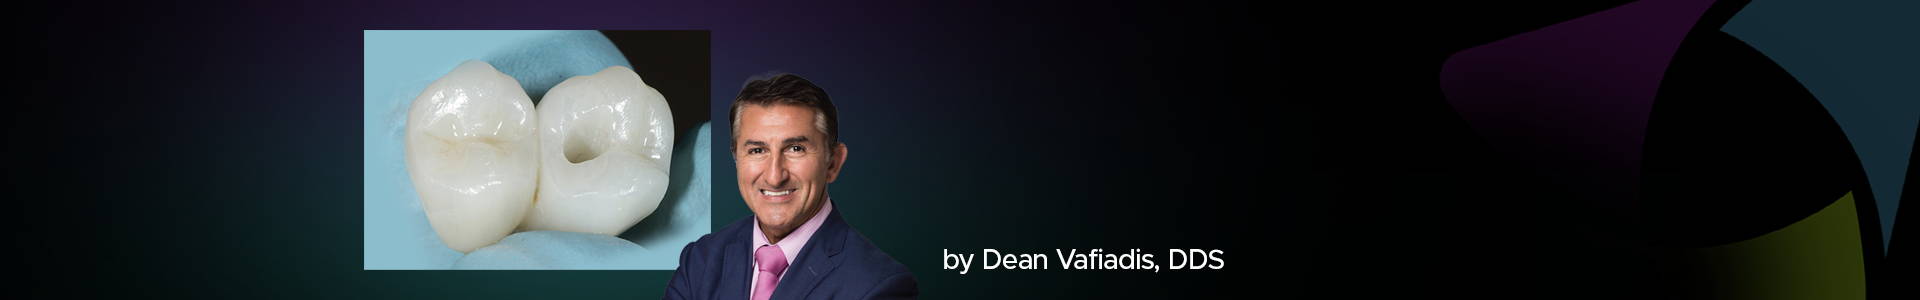 Blog banner of Dr Dean Vafiadis and a clinical image in the back